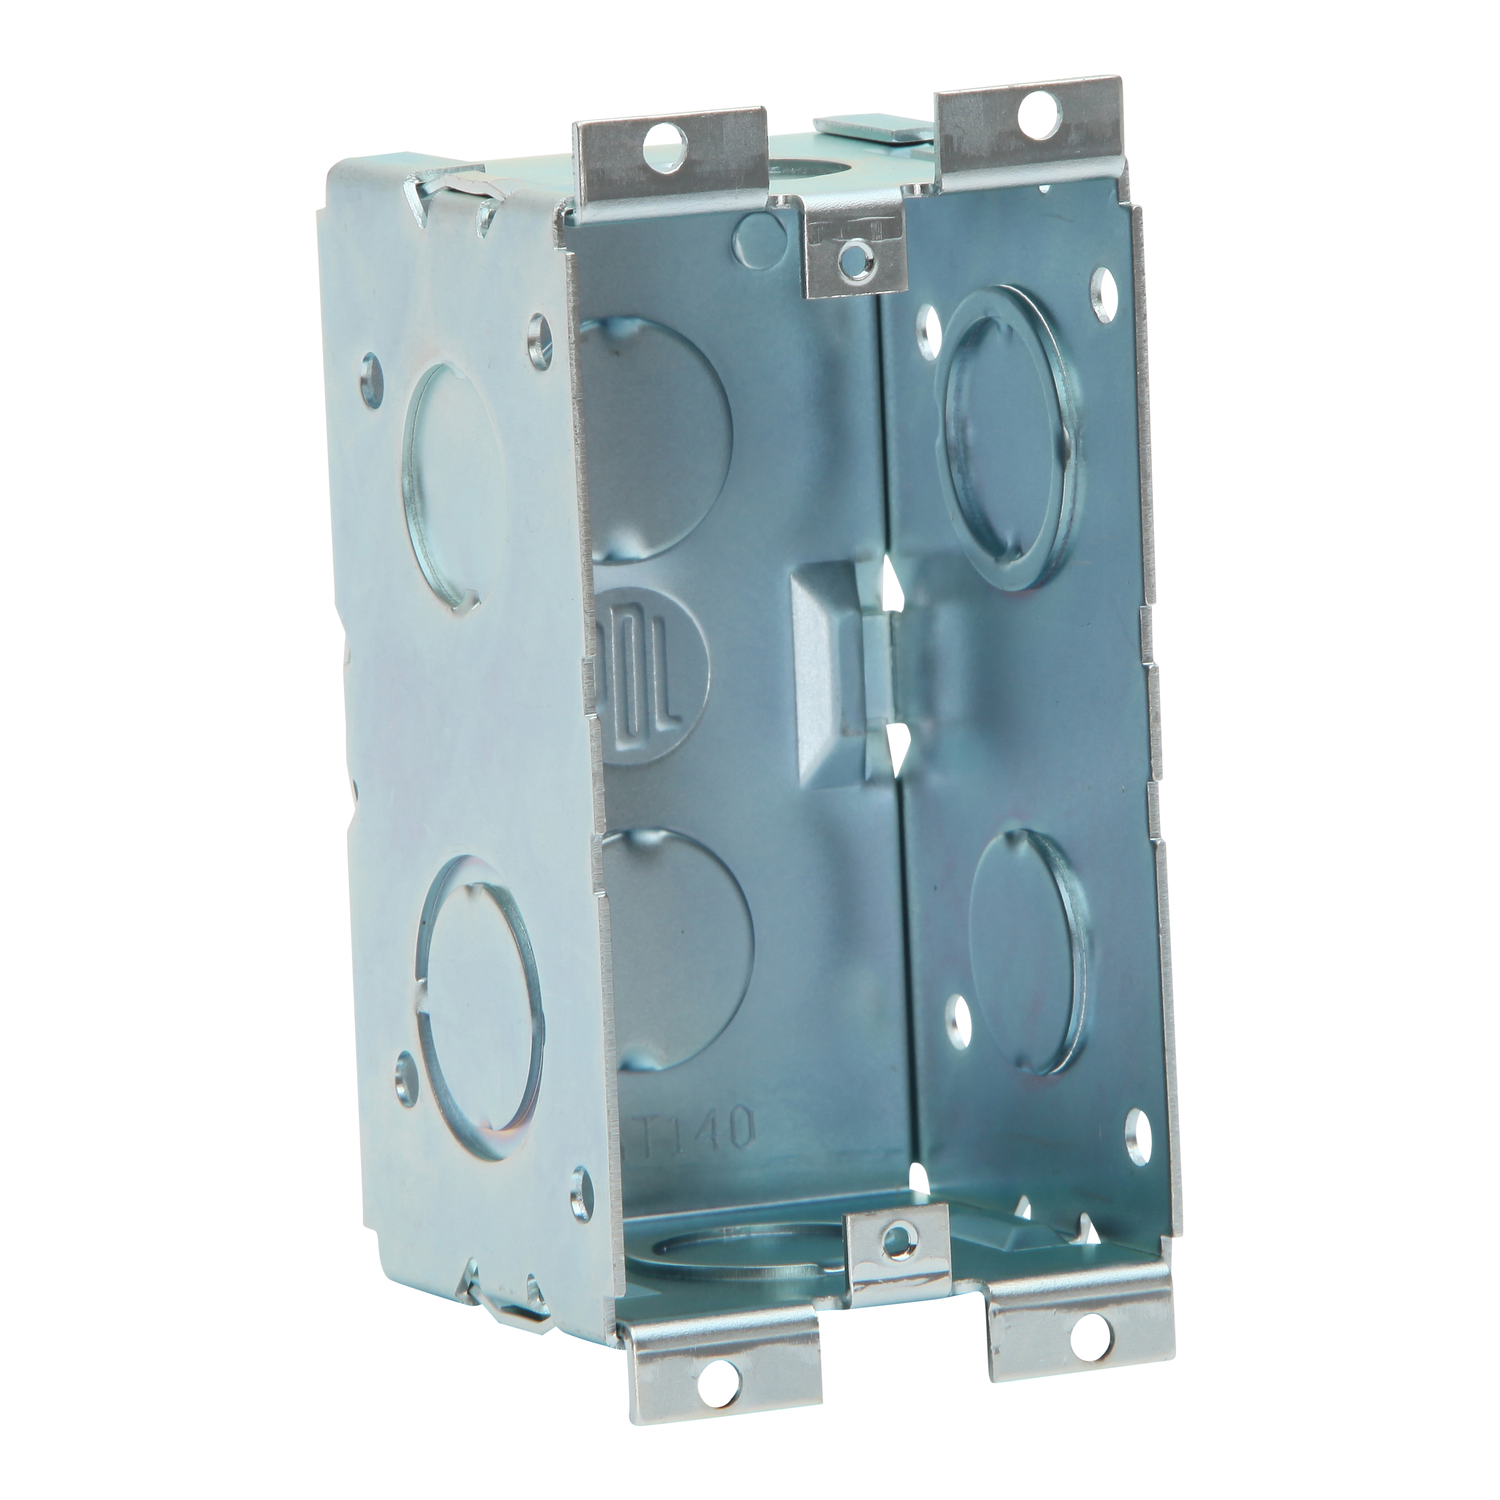 PDL Flush Box Fireproof and Acoustic rated 50mm Deep 1-Gang - Galvanised Steel